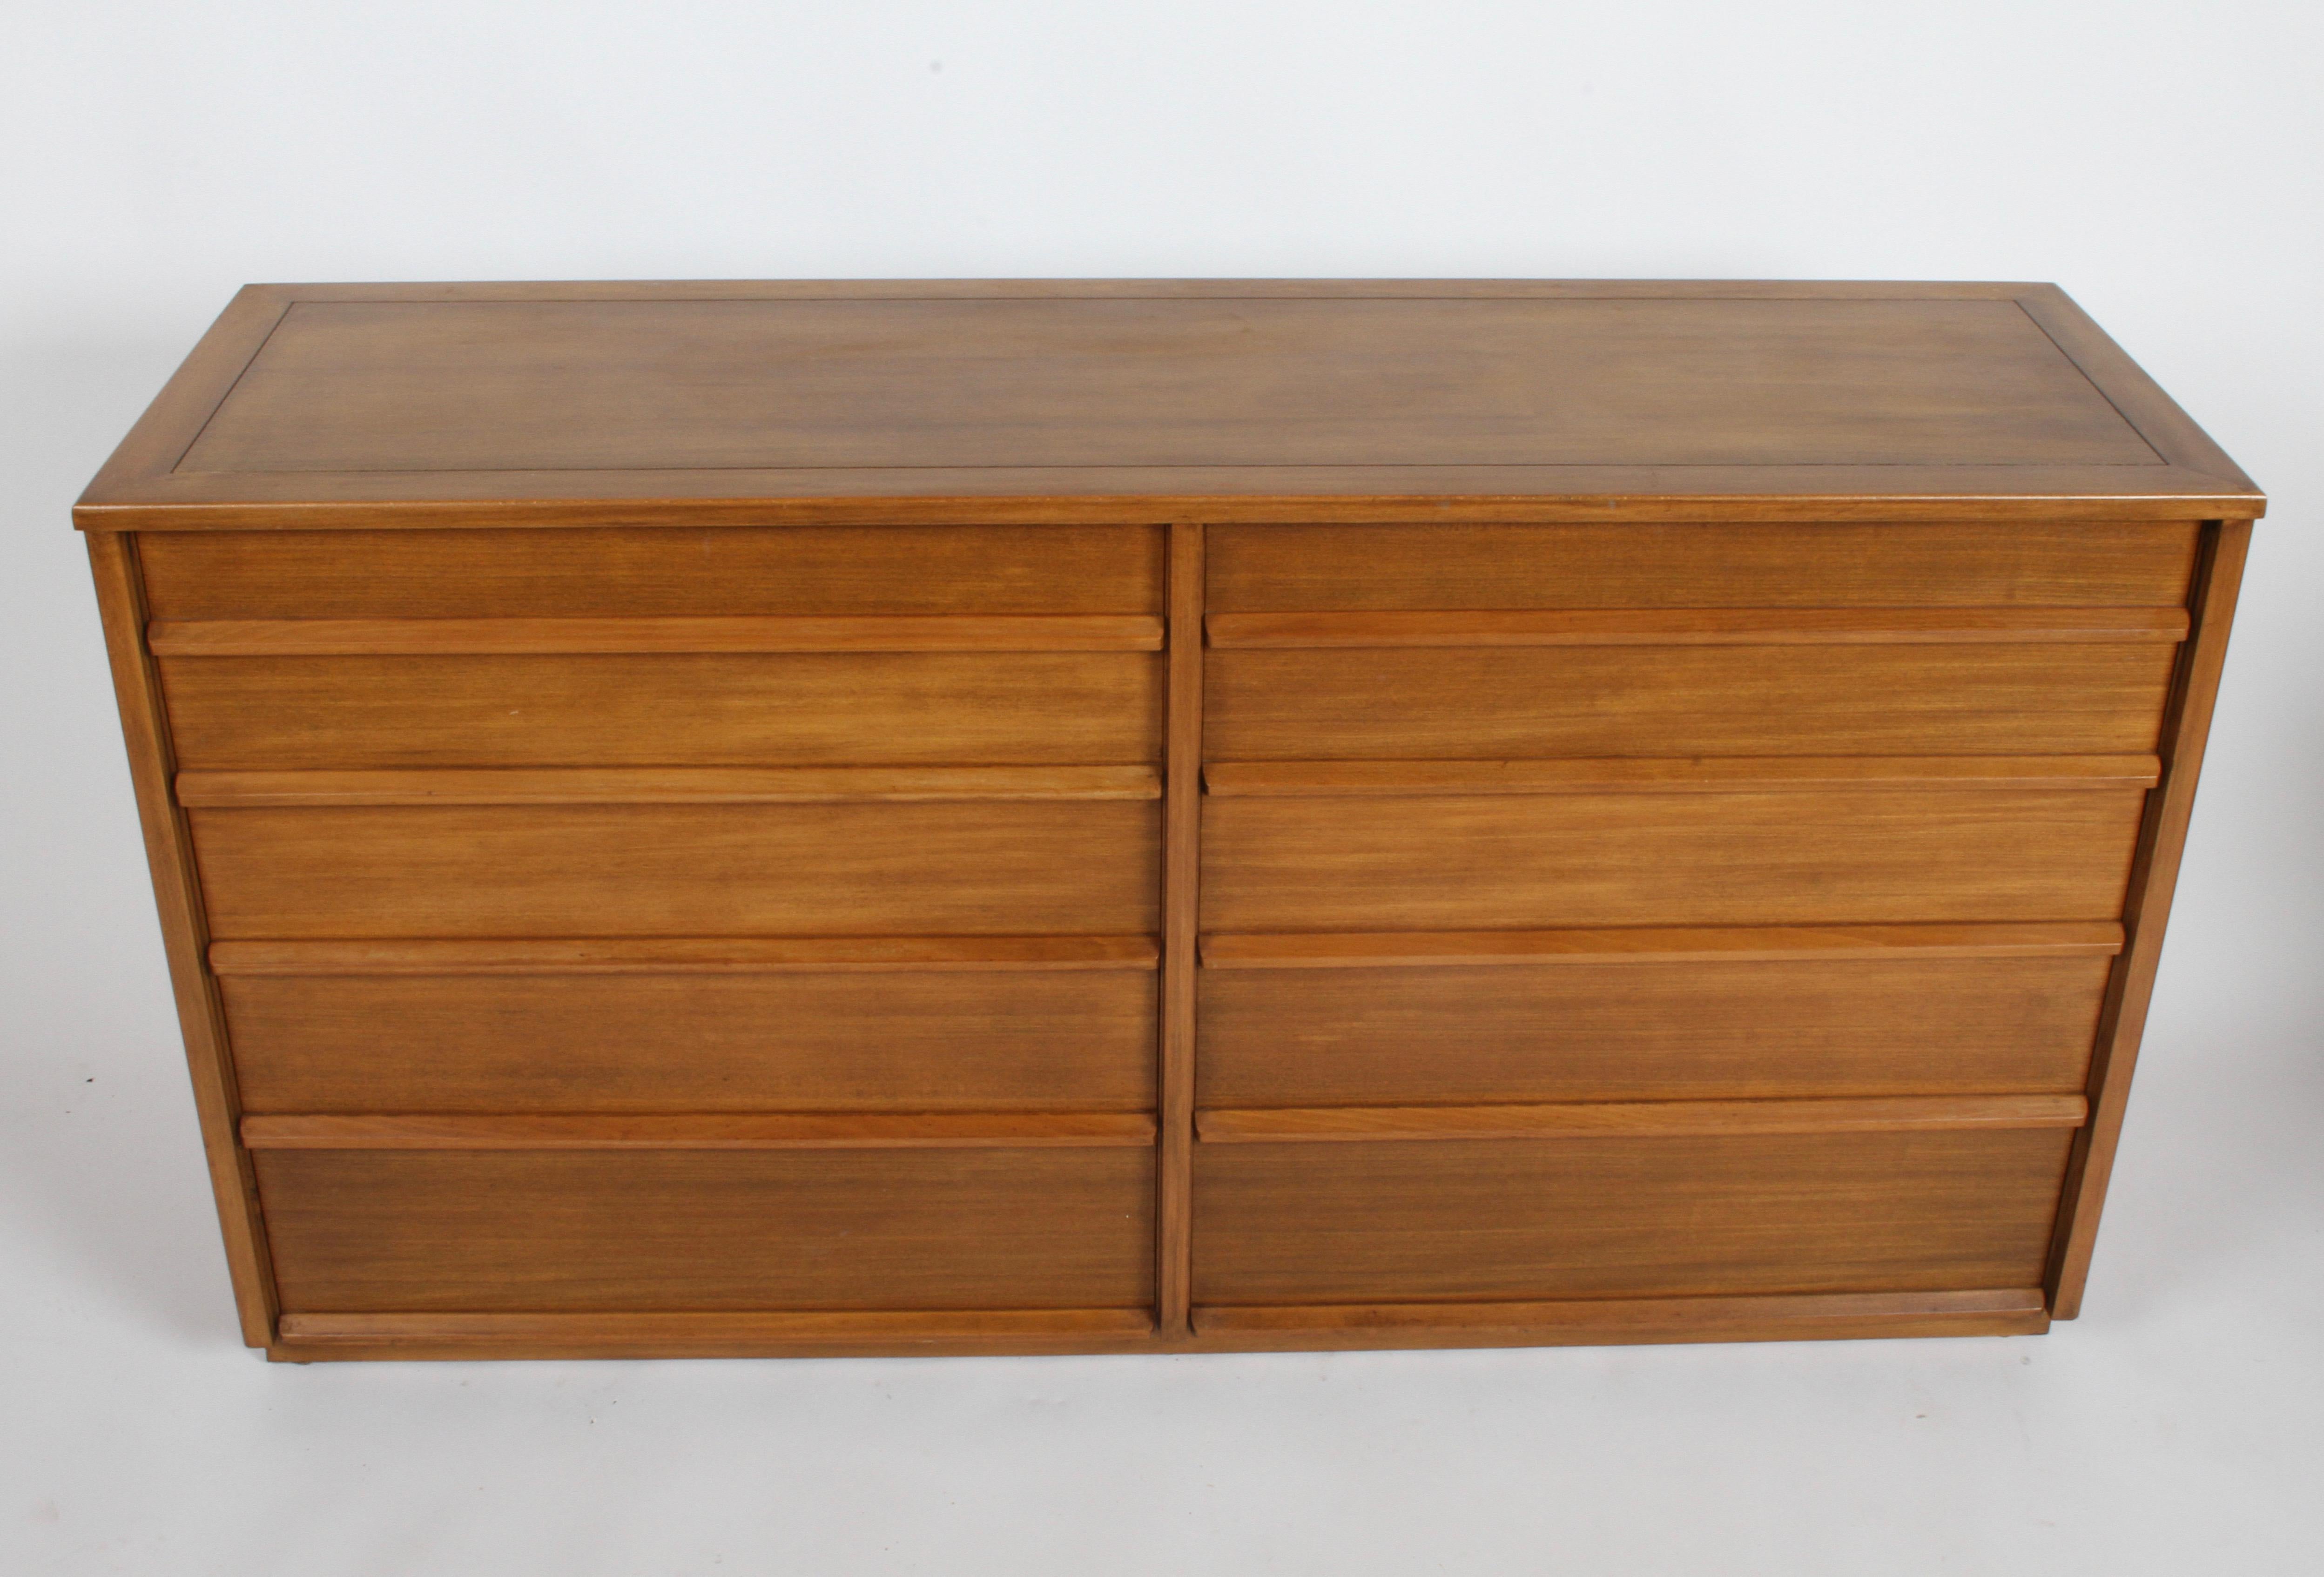 Mid-Century Modern dresser designed by Edward Wormley for his Drexel Precedent collection. Ten drawer dresser in original finish, beautiful Silver Elm veneer, dresser will be touched up prior to shipping. Drexel branded stamp inside drawer and